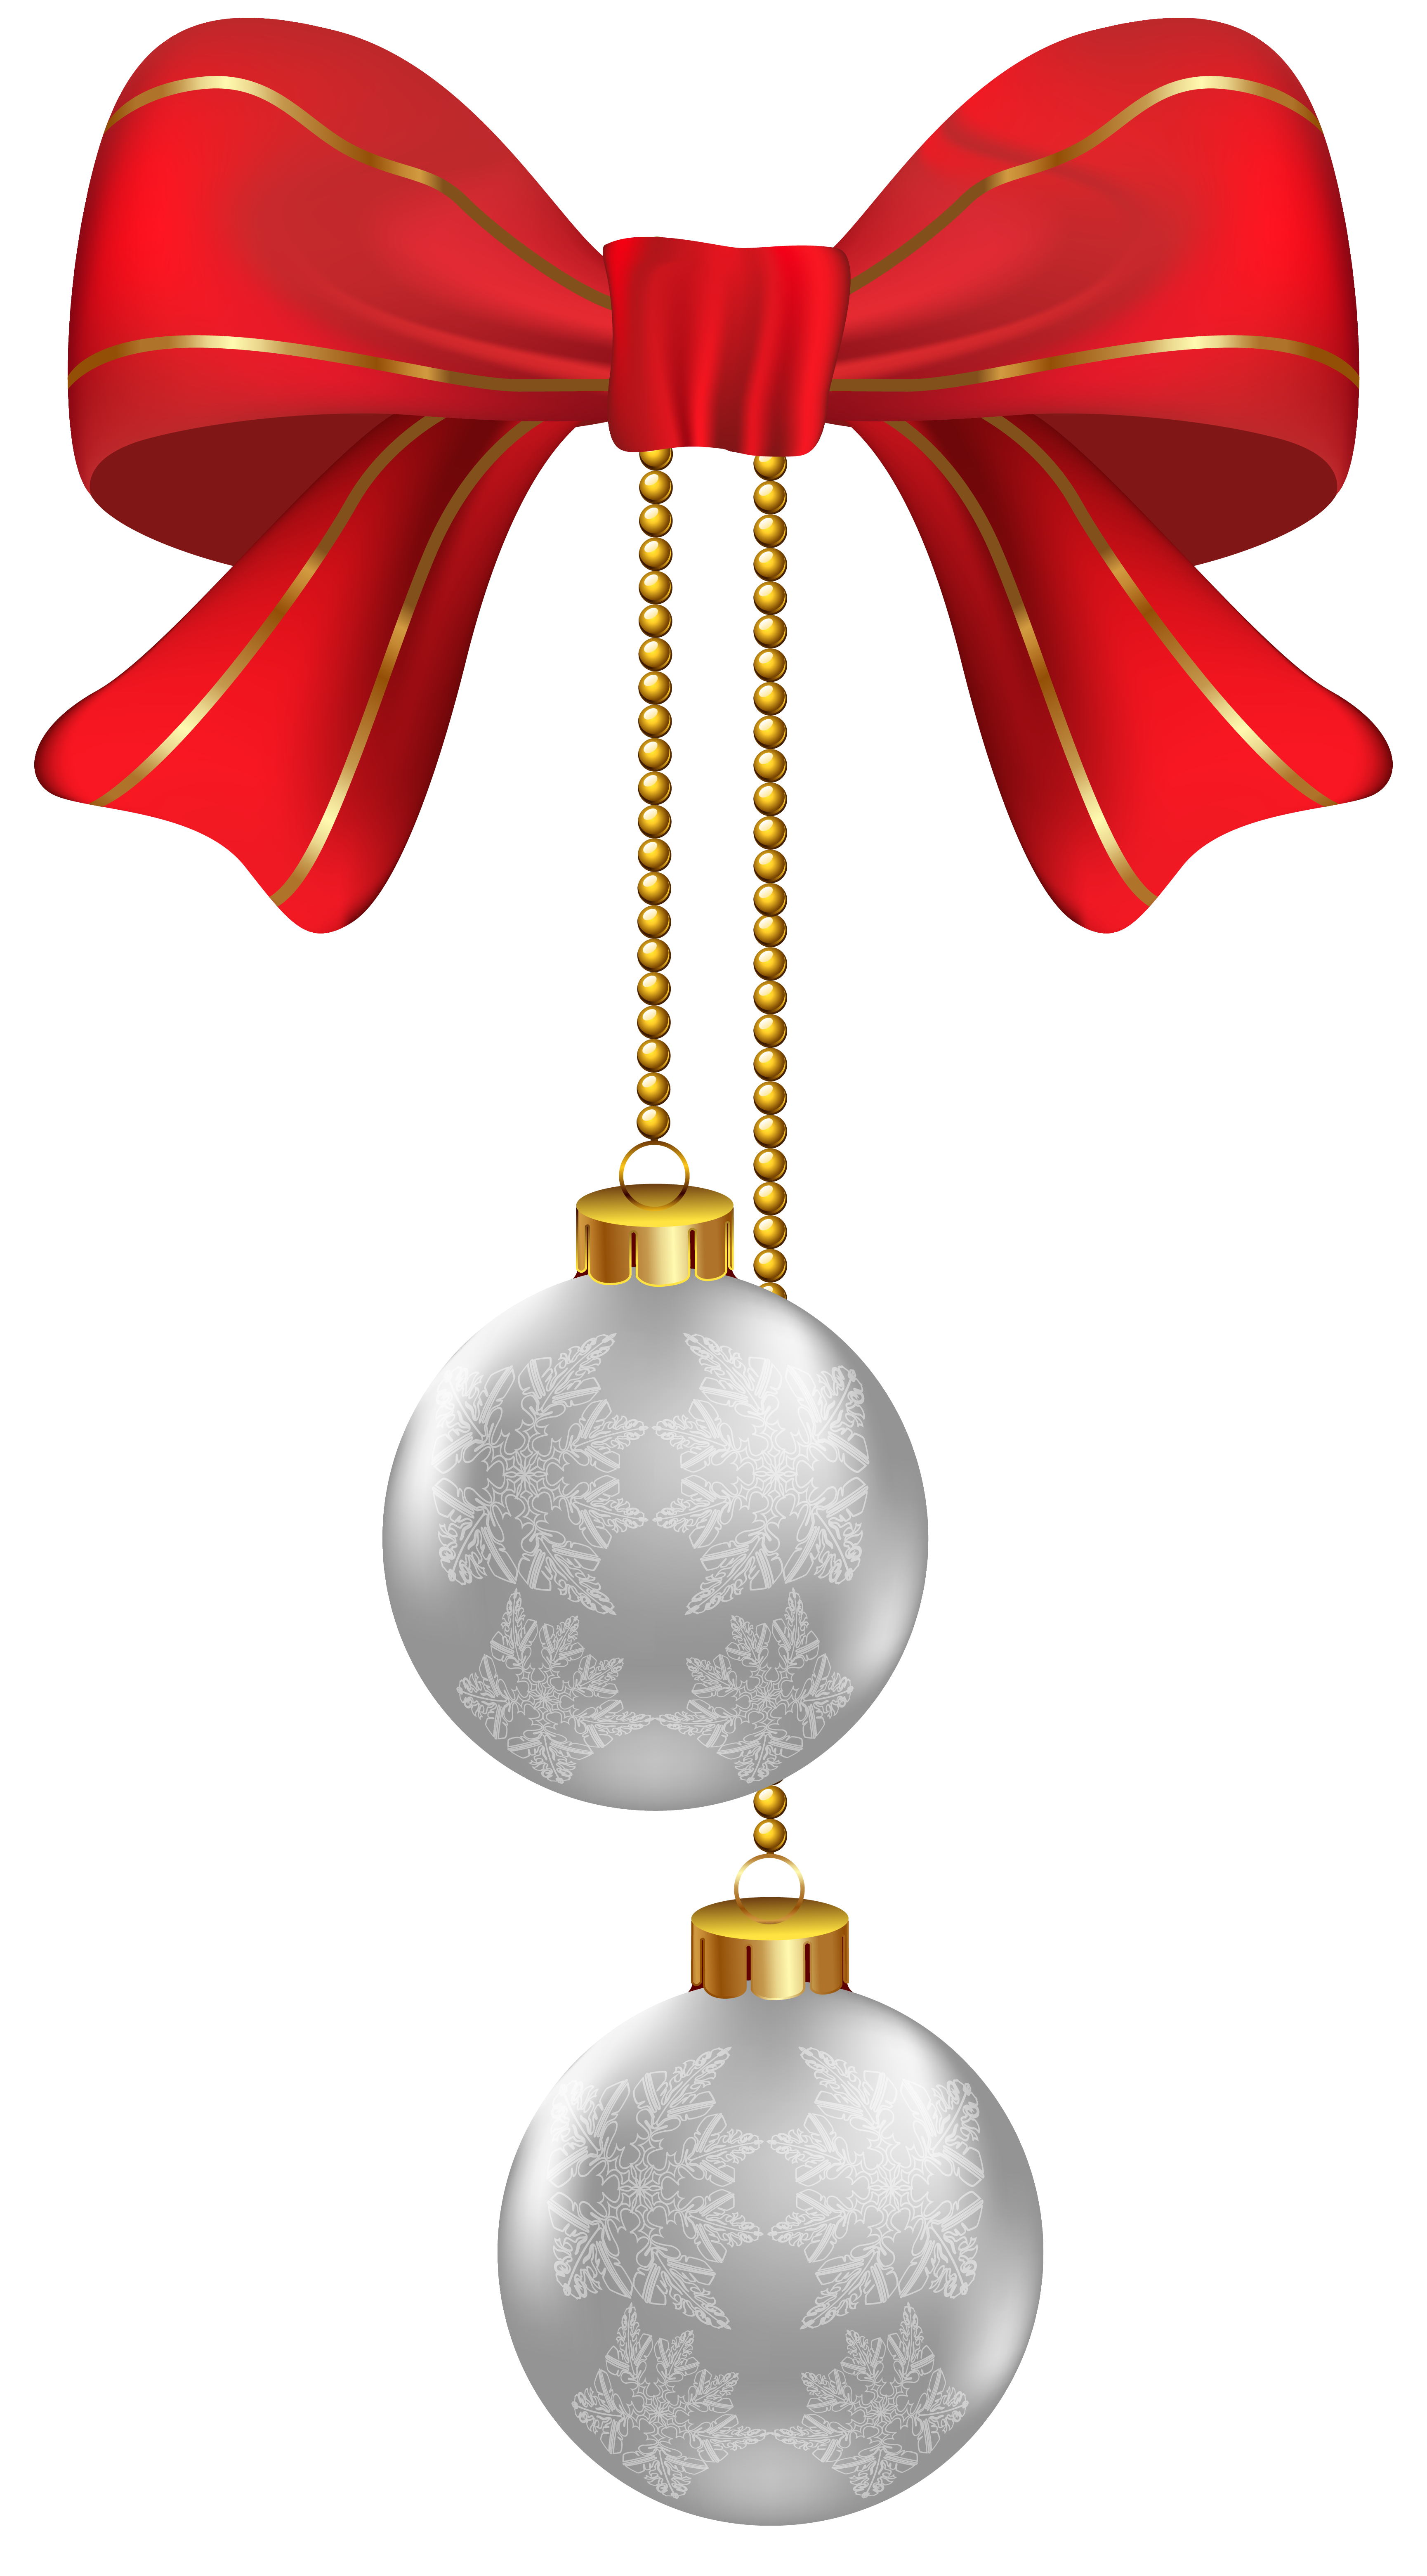 Jacket clipart christmas. Hanging silver ornaments png